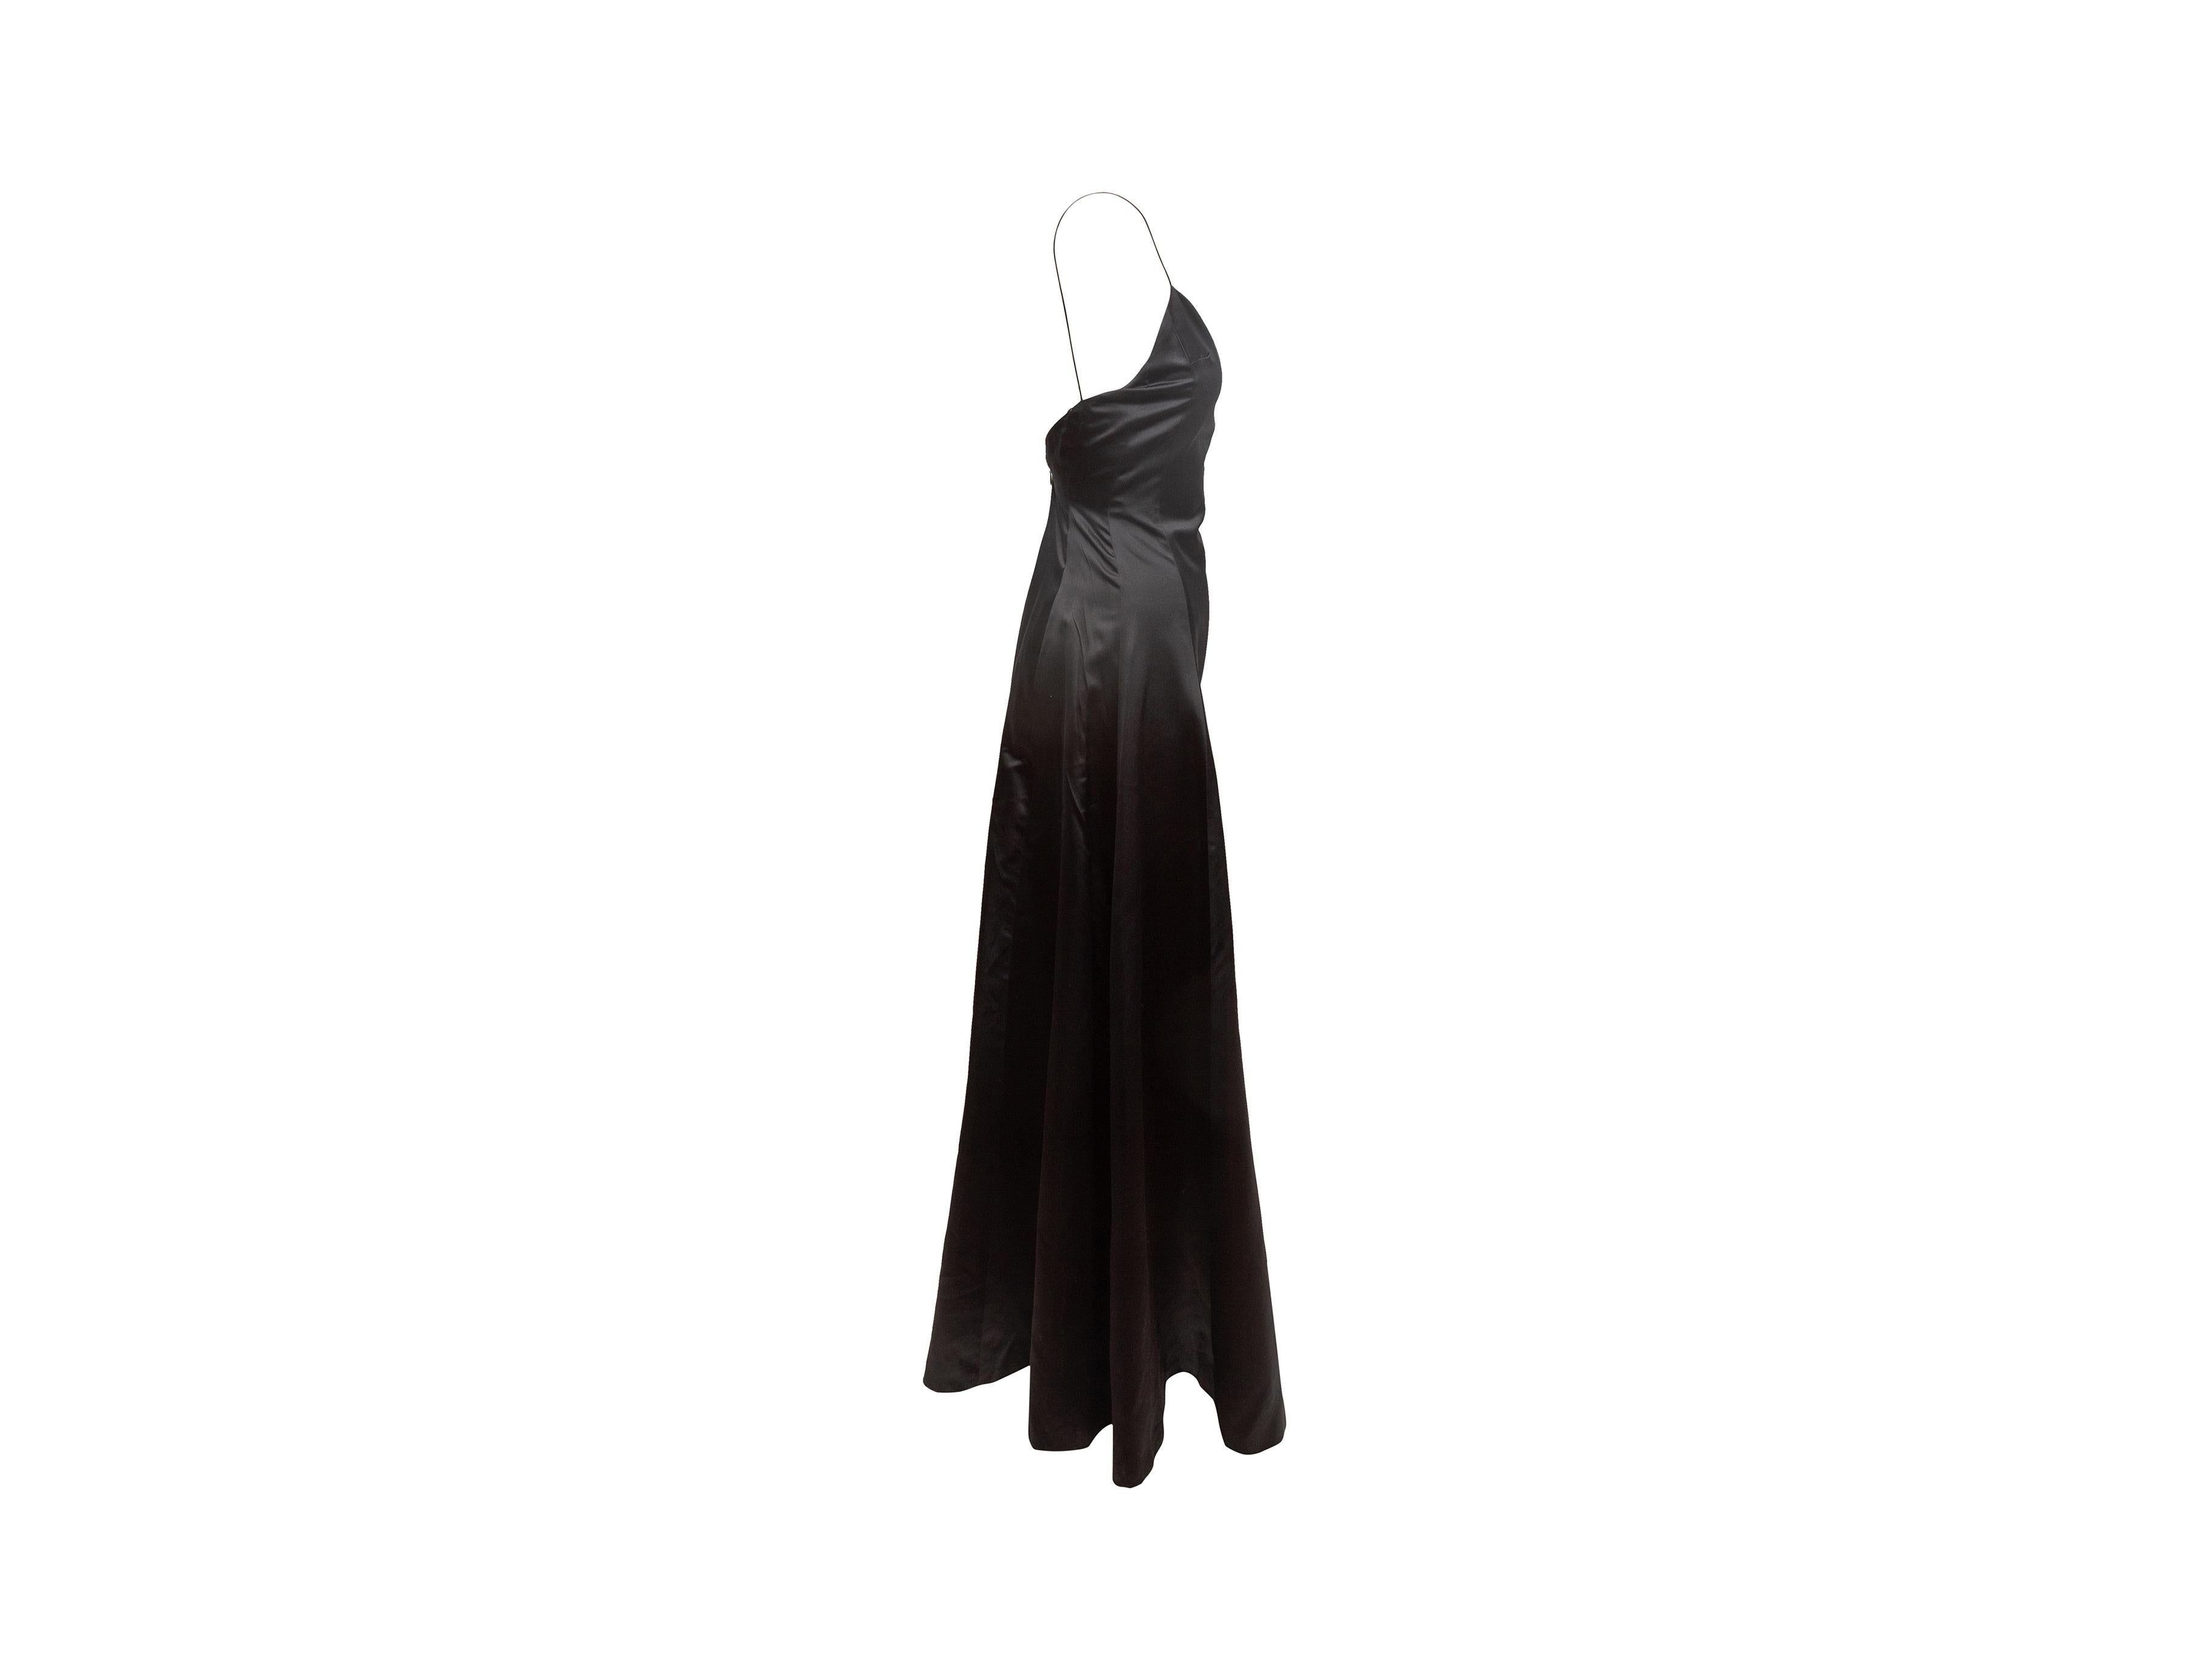 Product details: Black silk sleeveless evening gown by Ralph Lauren Collection. V-neck. Narrow straps. Zip closure at back. 30